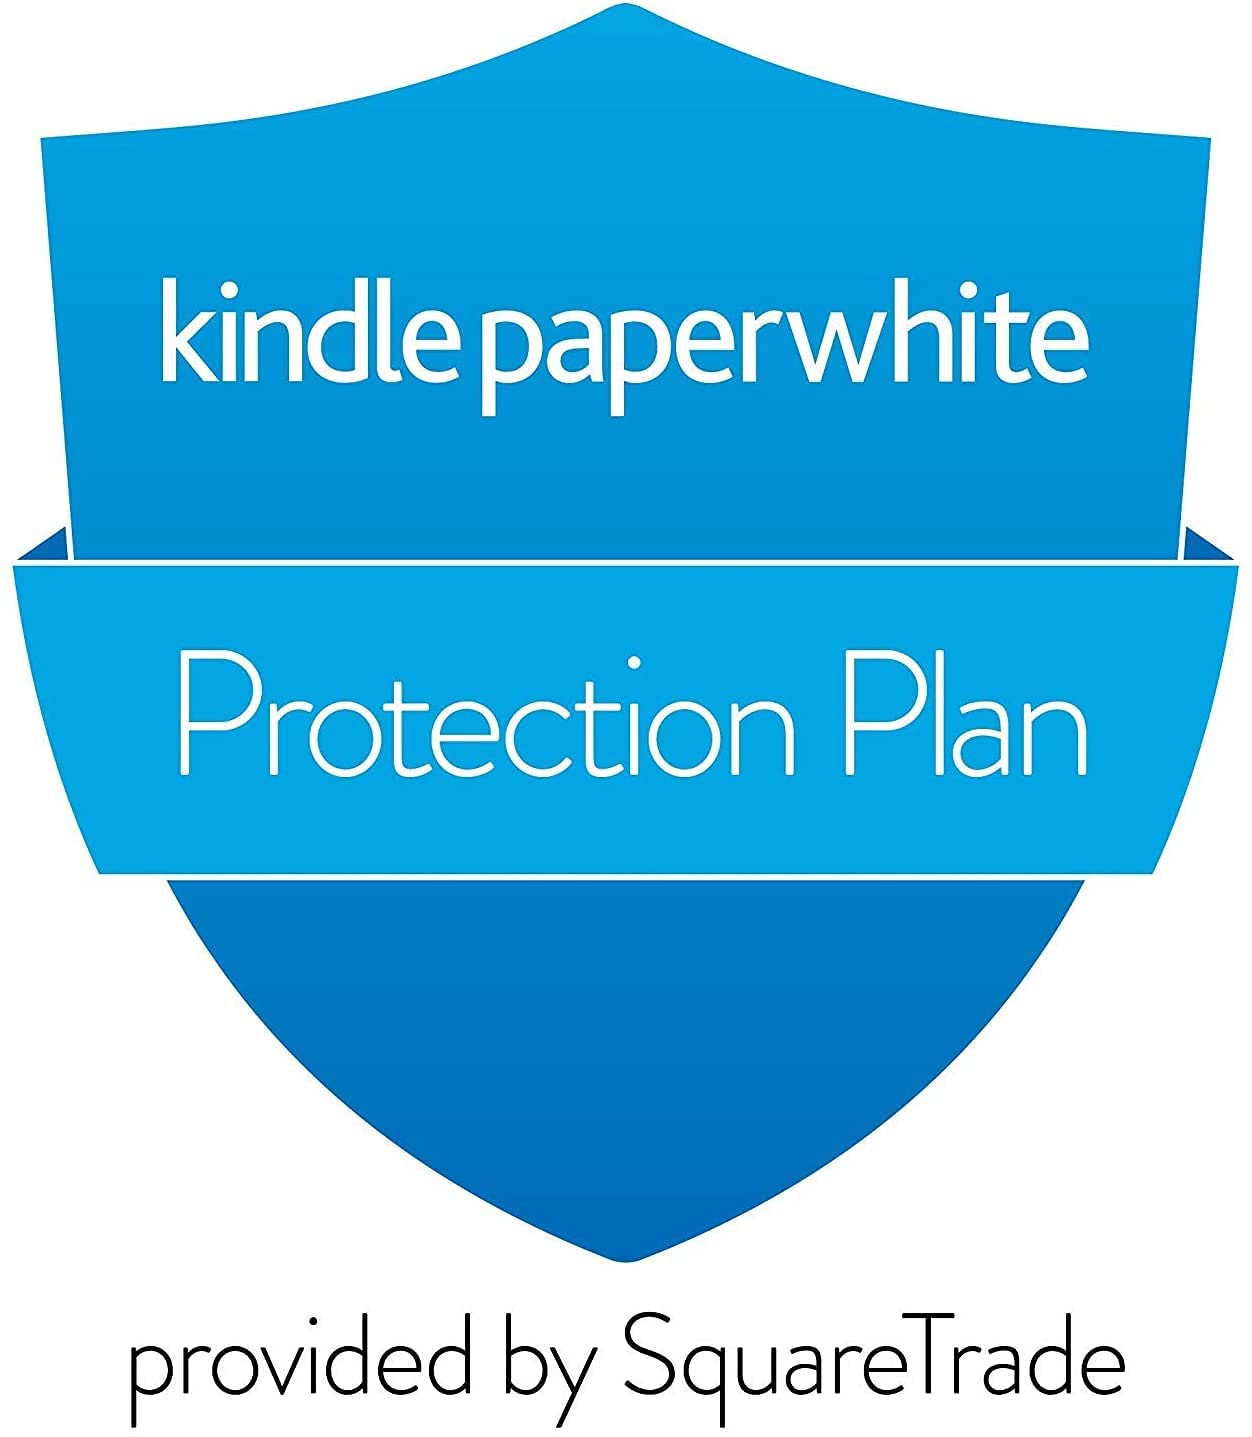 2-Year Accident Protection Plan for Kindle Paperwhite